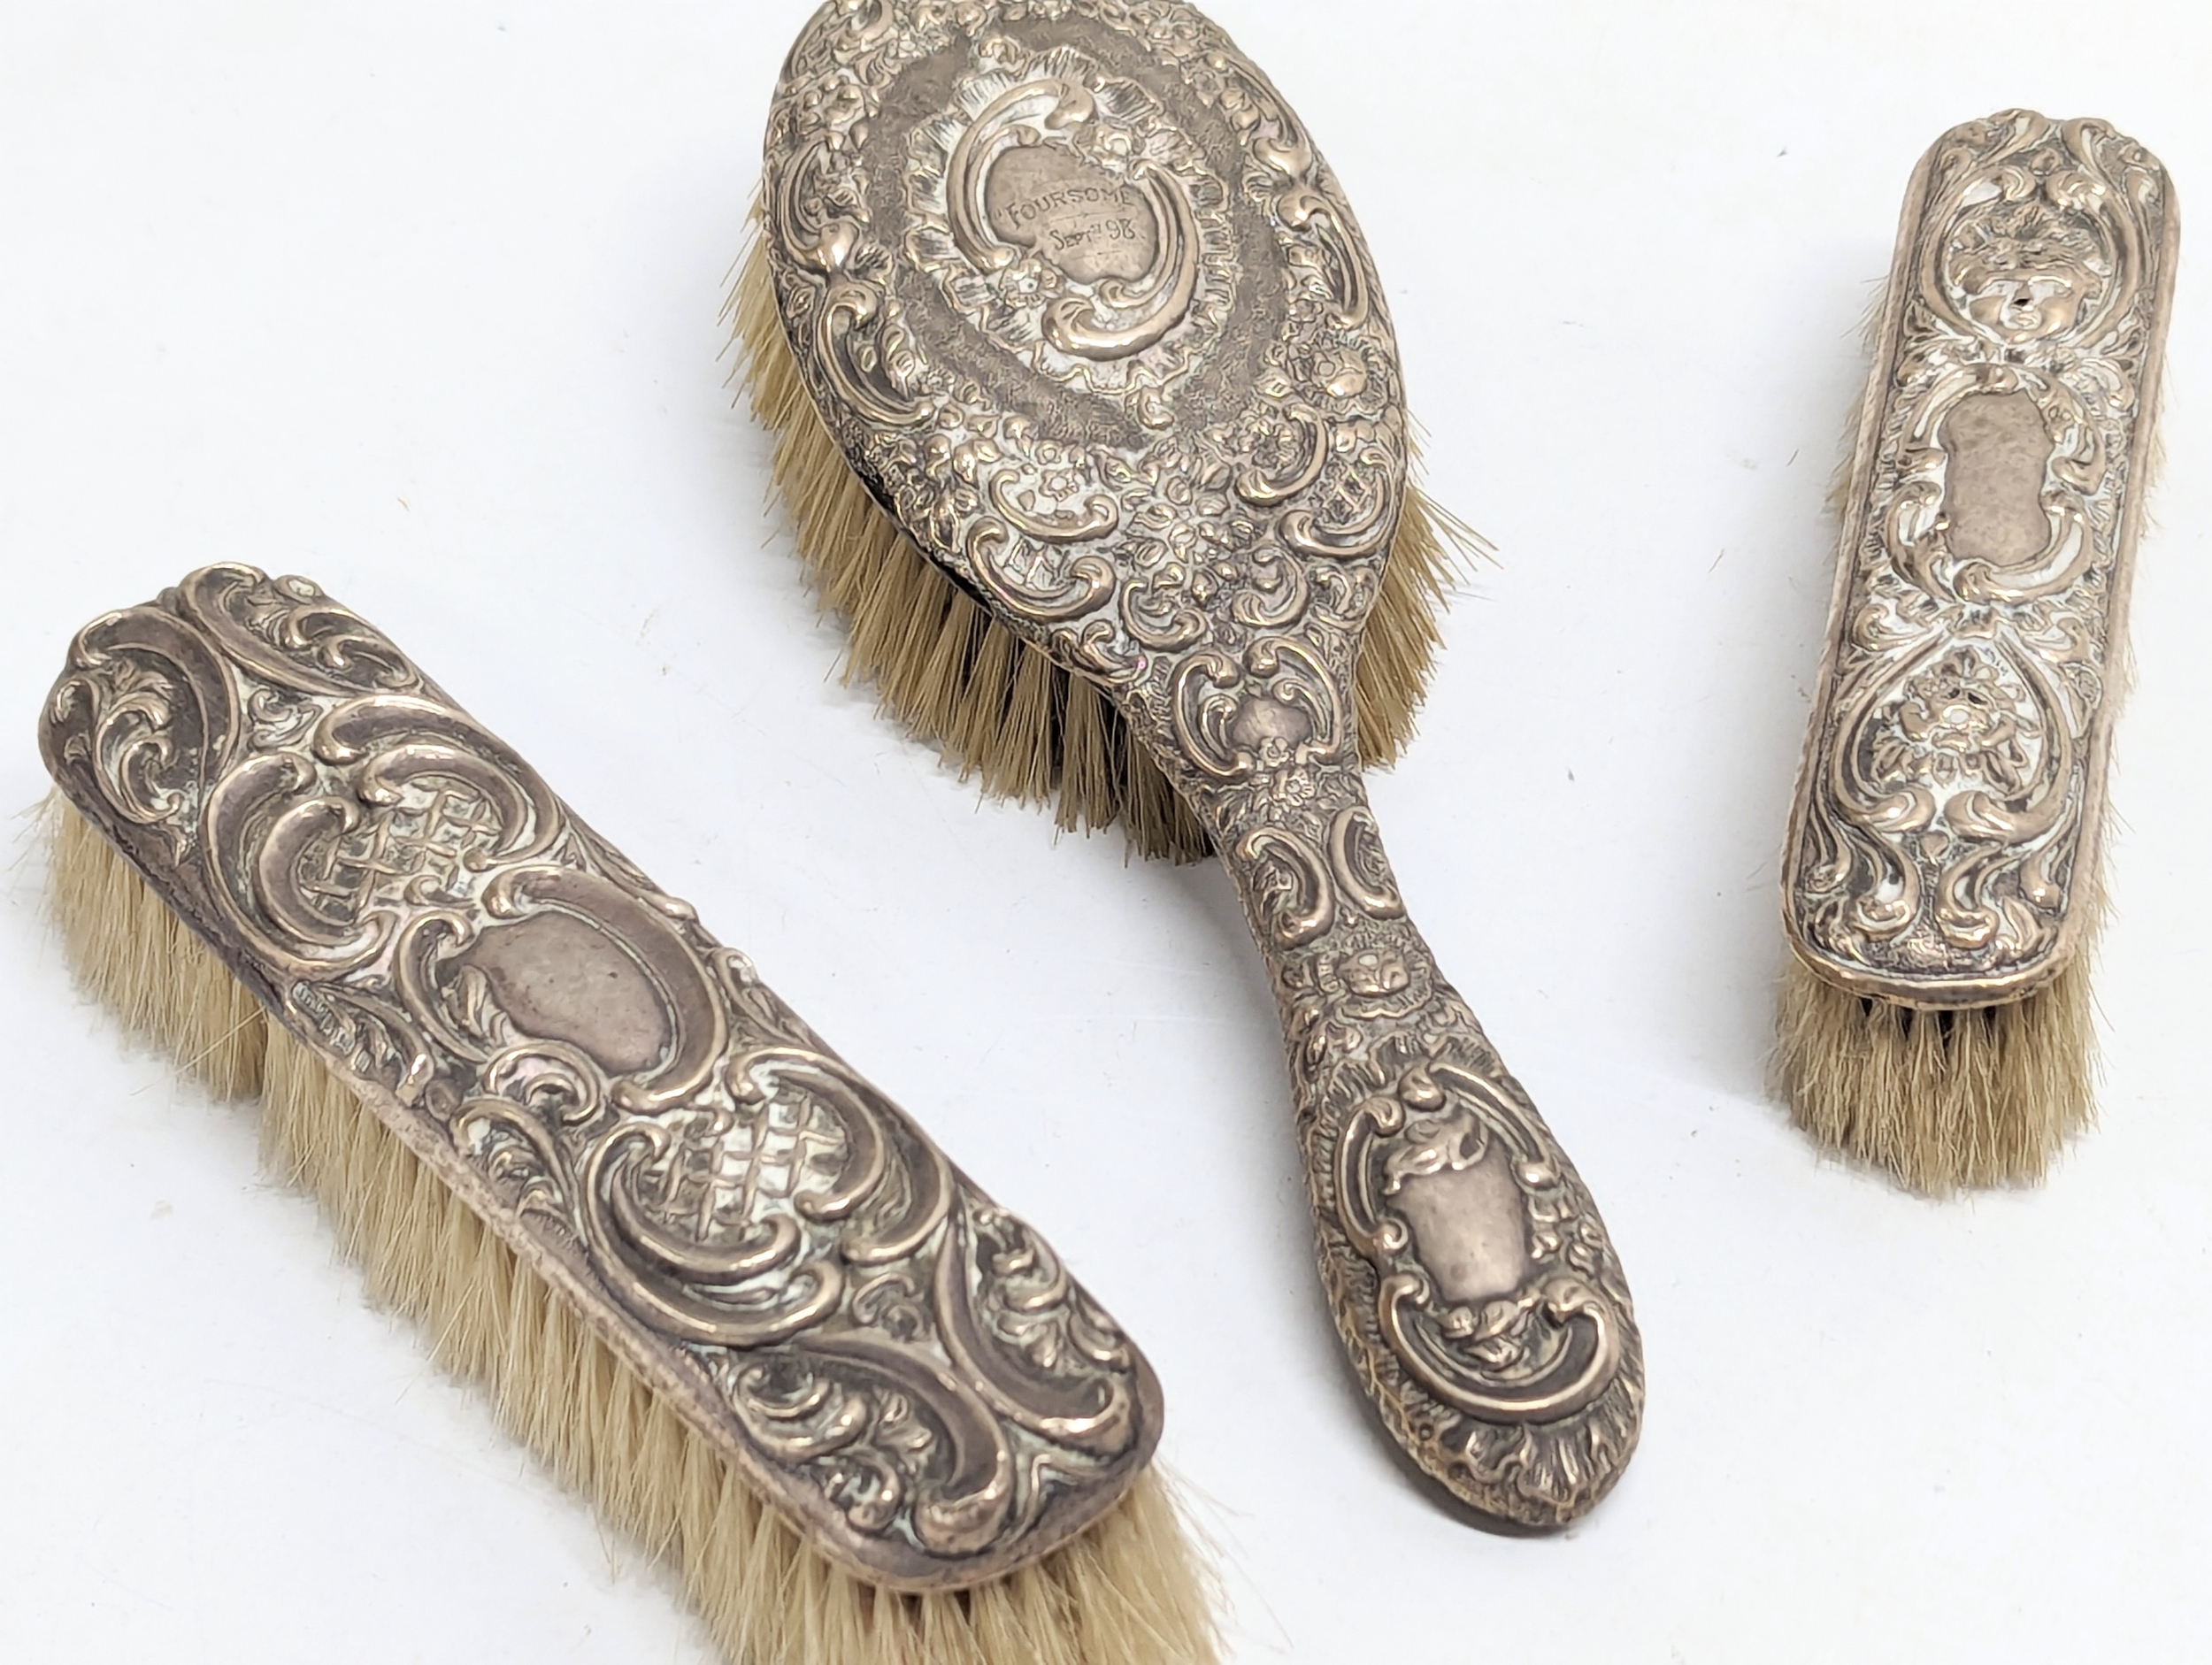 3 late 19th / early 20th century silver vanity brushes. William Aitken, Chester, 1900. George Nathan - Image 2 of 3